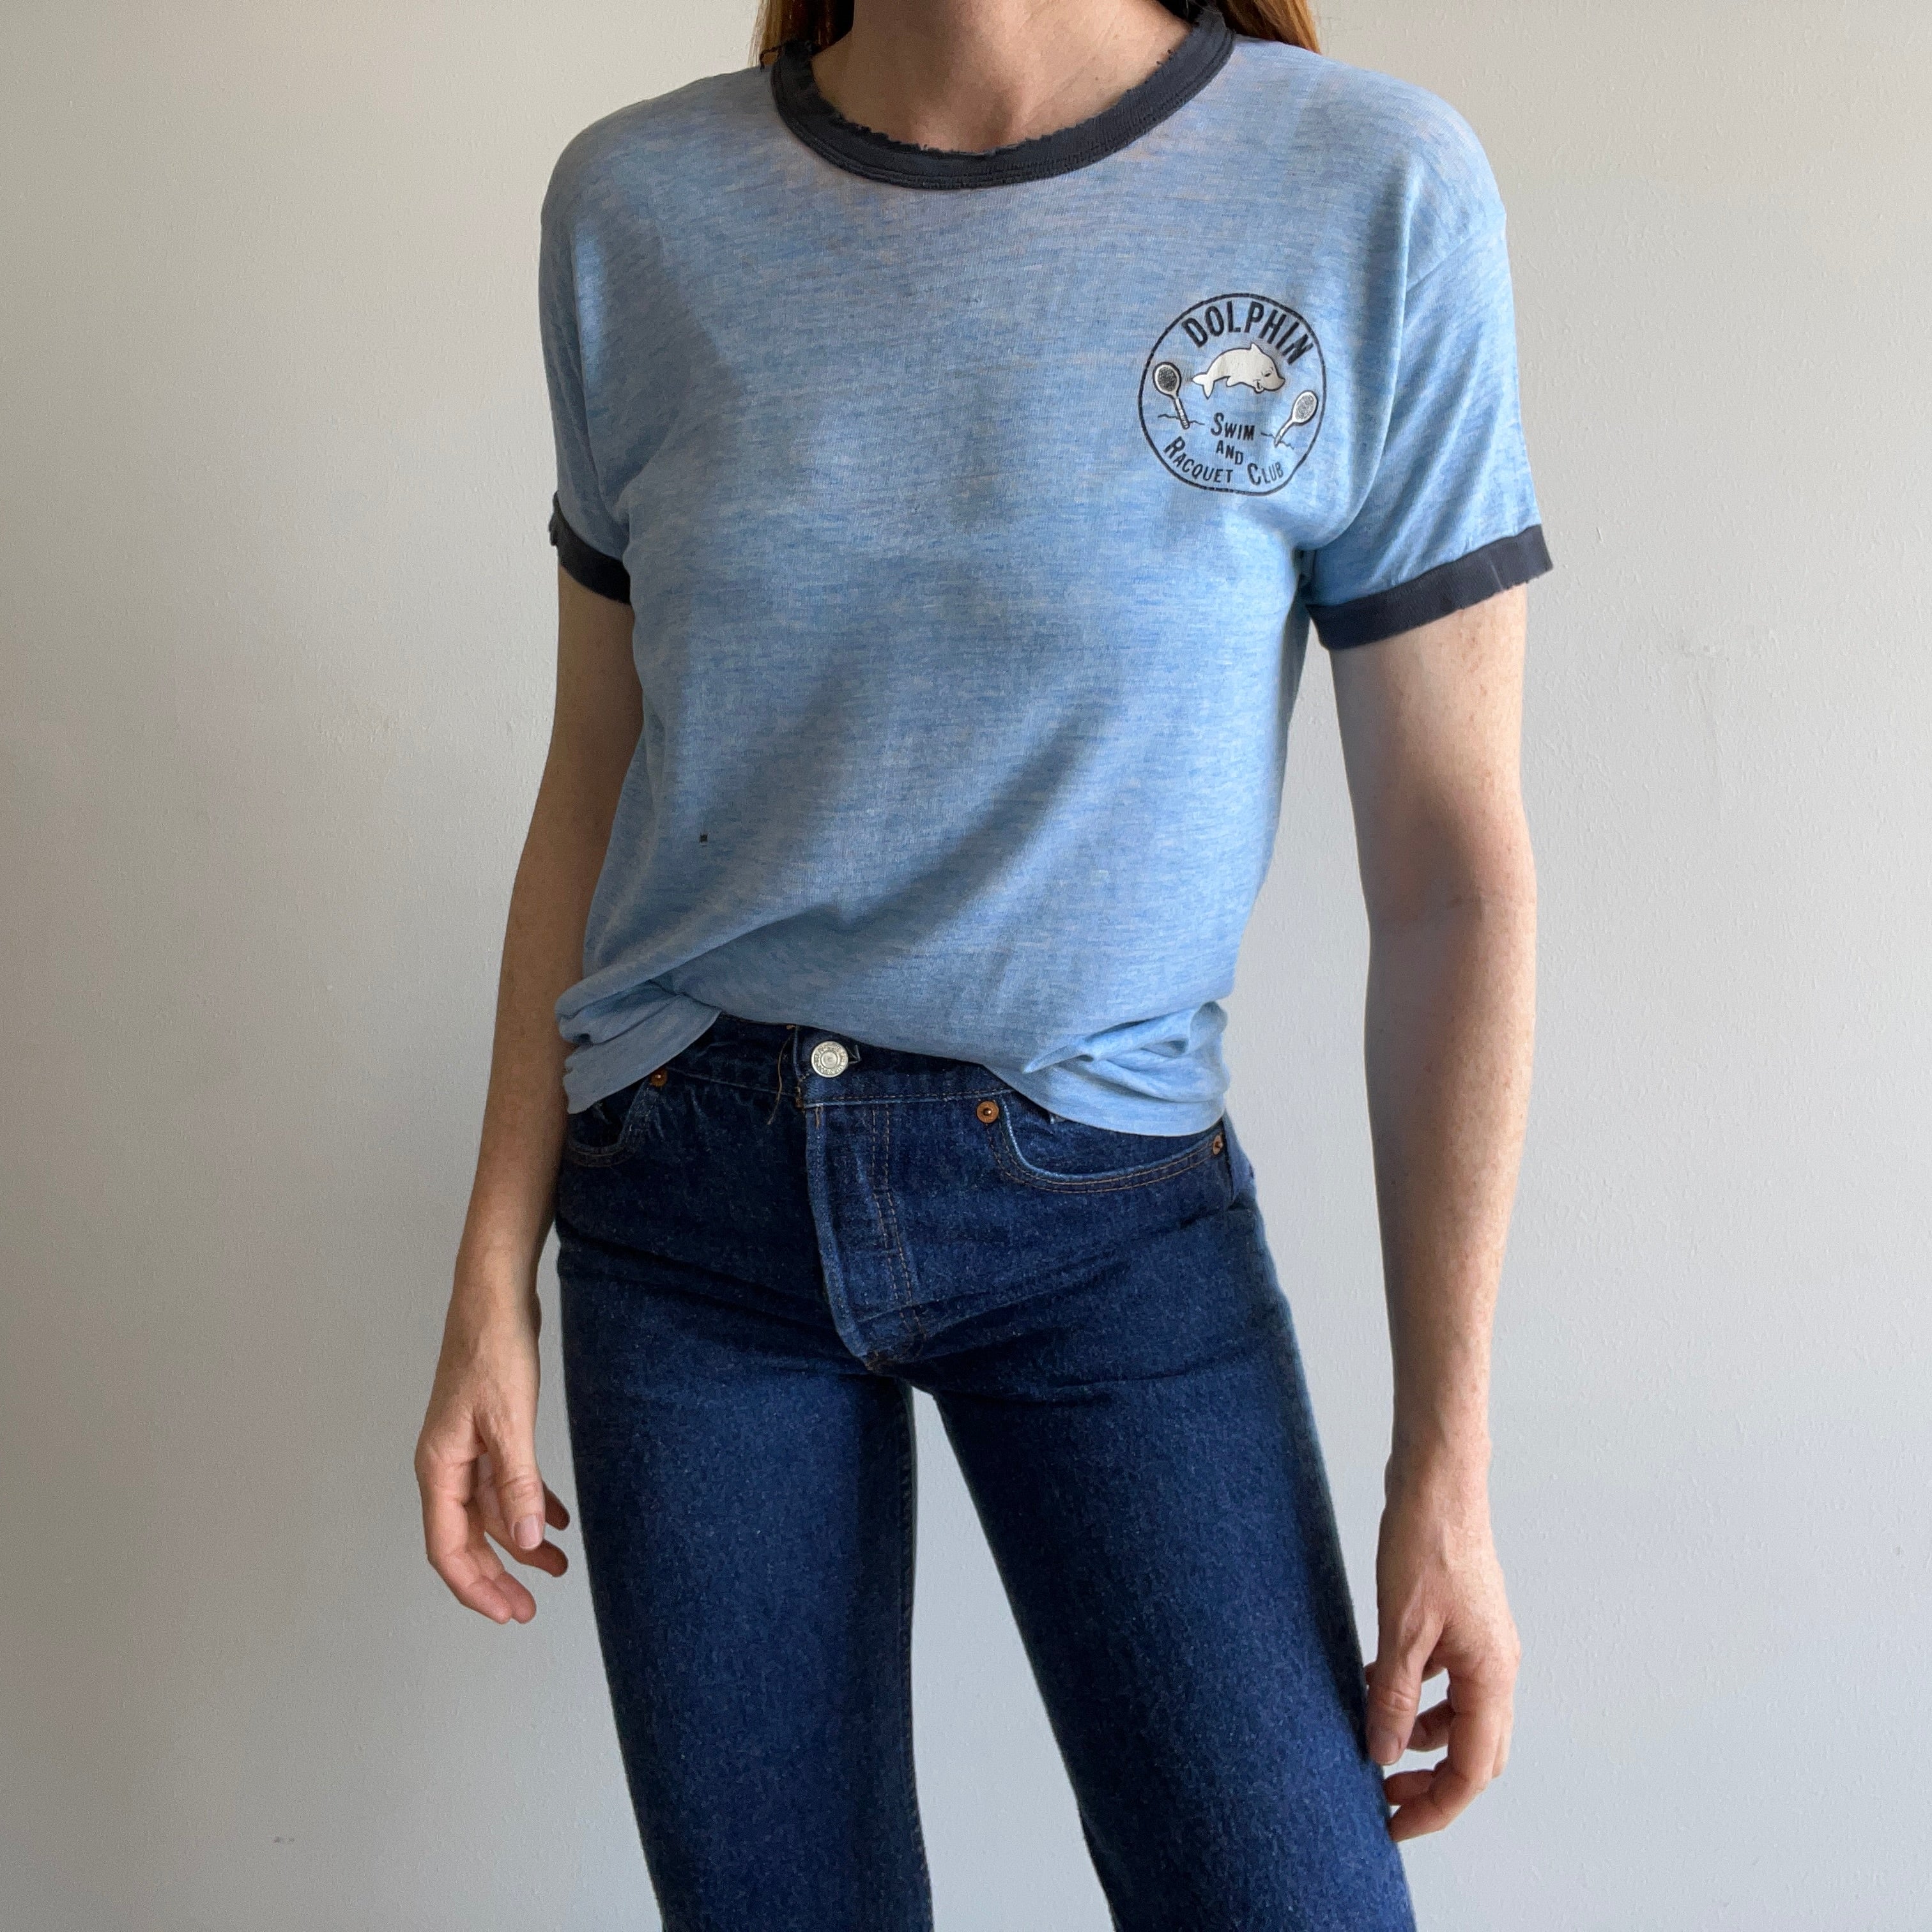 1970s Tissue Paper Thin and Shredded Dolphin Swim and Racquet Club Ring T-Shirt